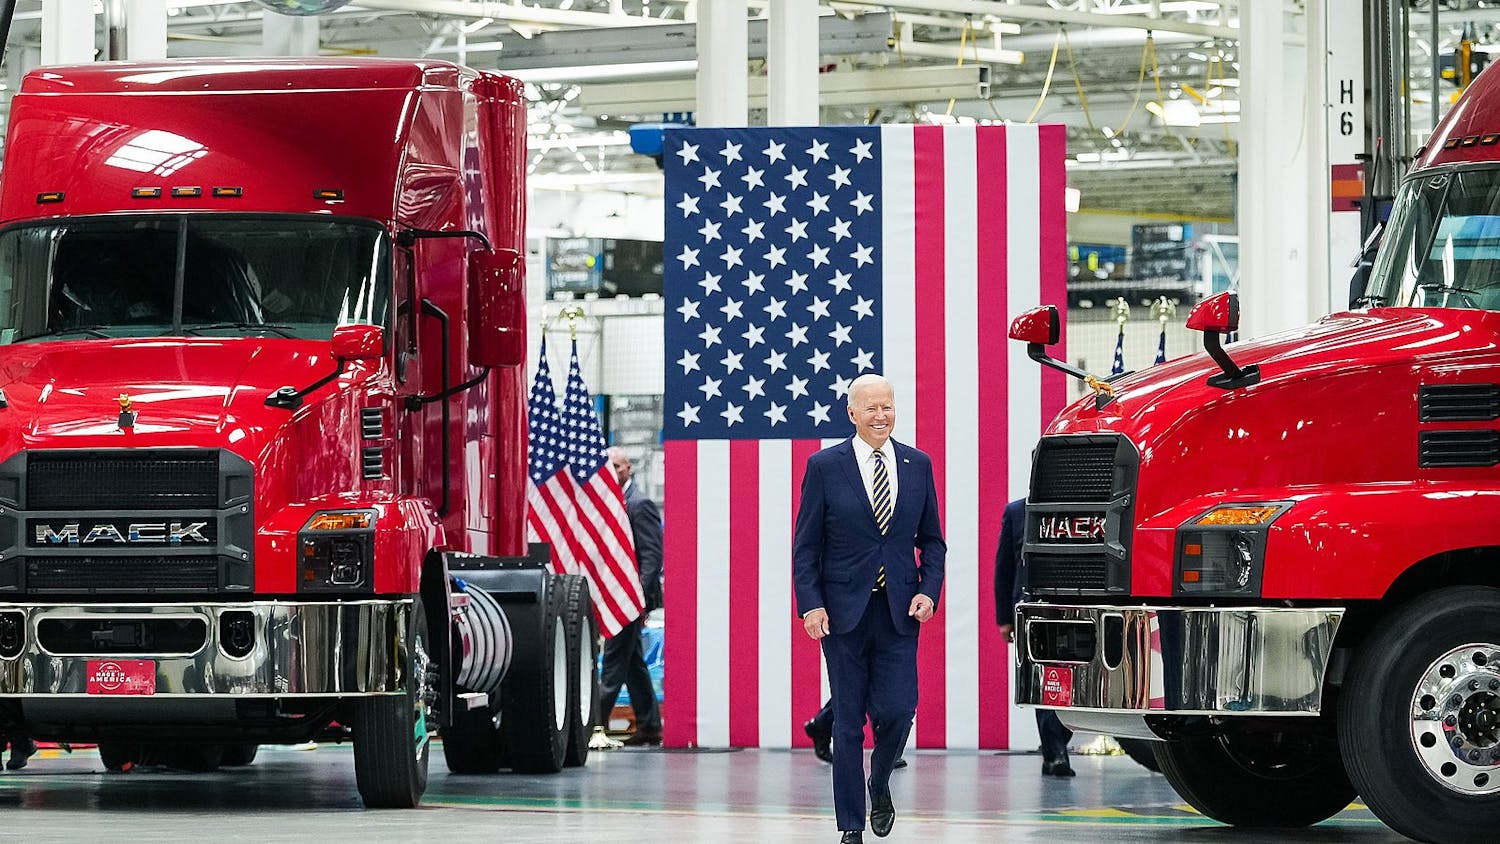 The new tariff aims to triple the existing tariff rate of 7.5% on steel and aluminum products from China, seeking to curb unfair competition for American workers and improve quality control (Photo courtesy of Wikimedia Commons / The White House. July 28, 2021). 